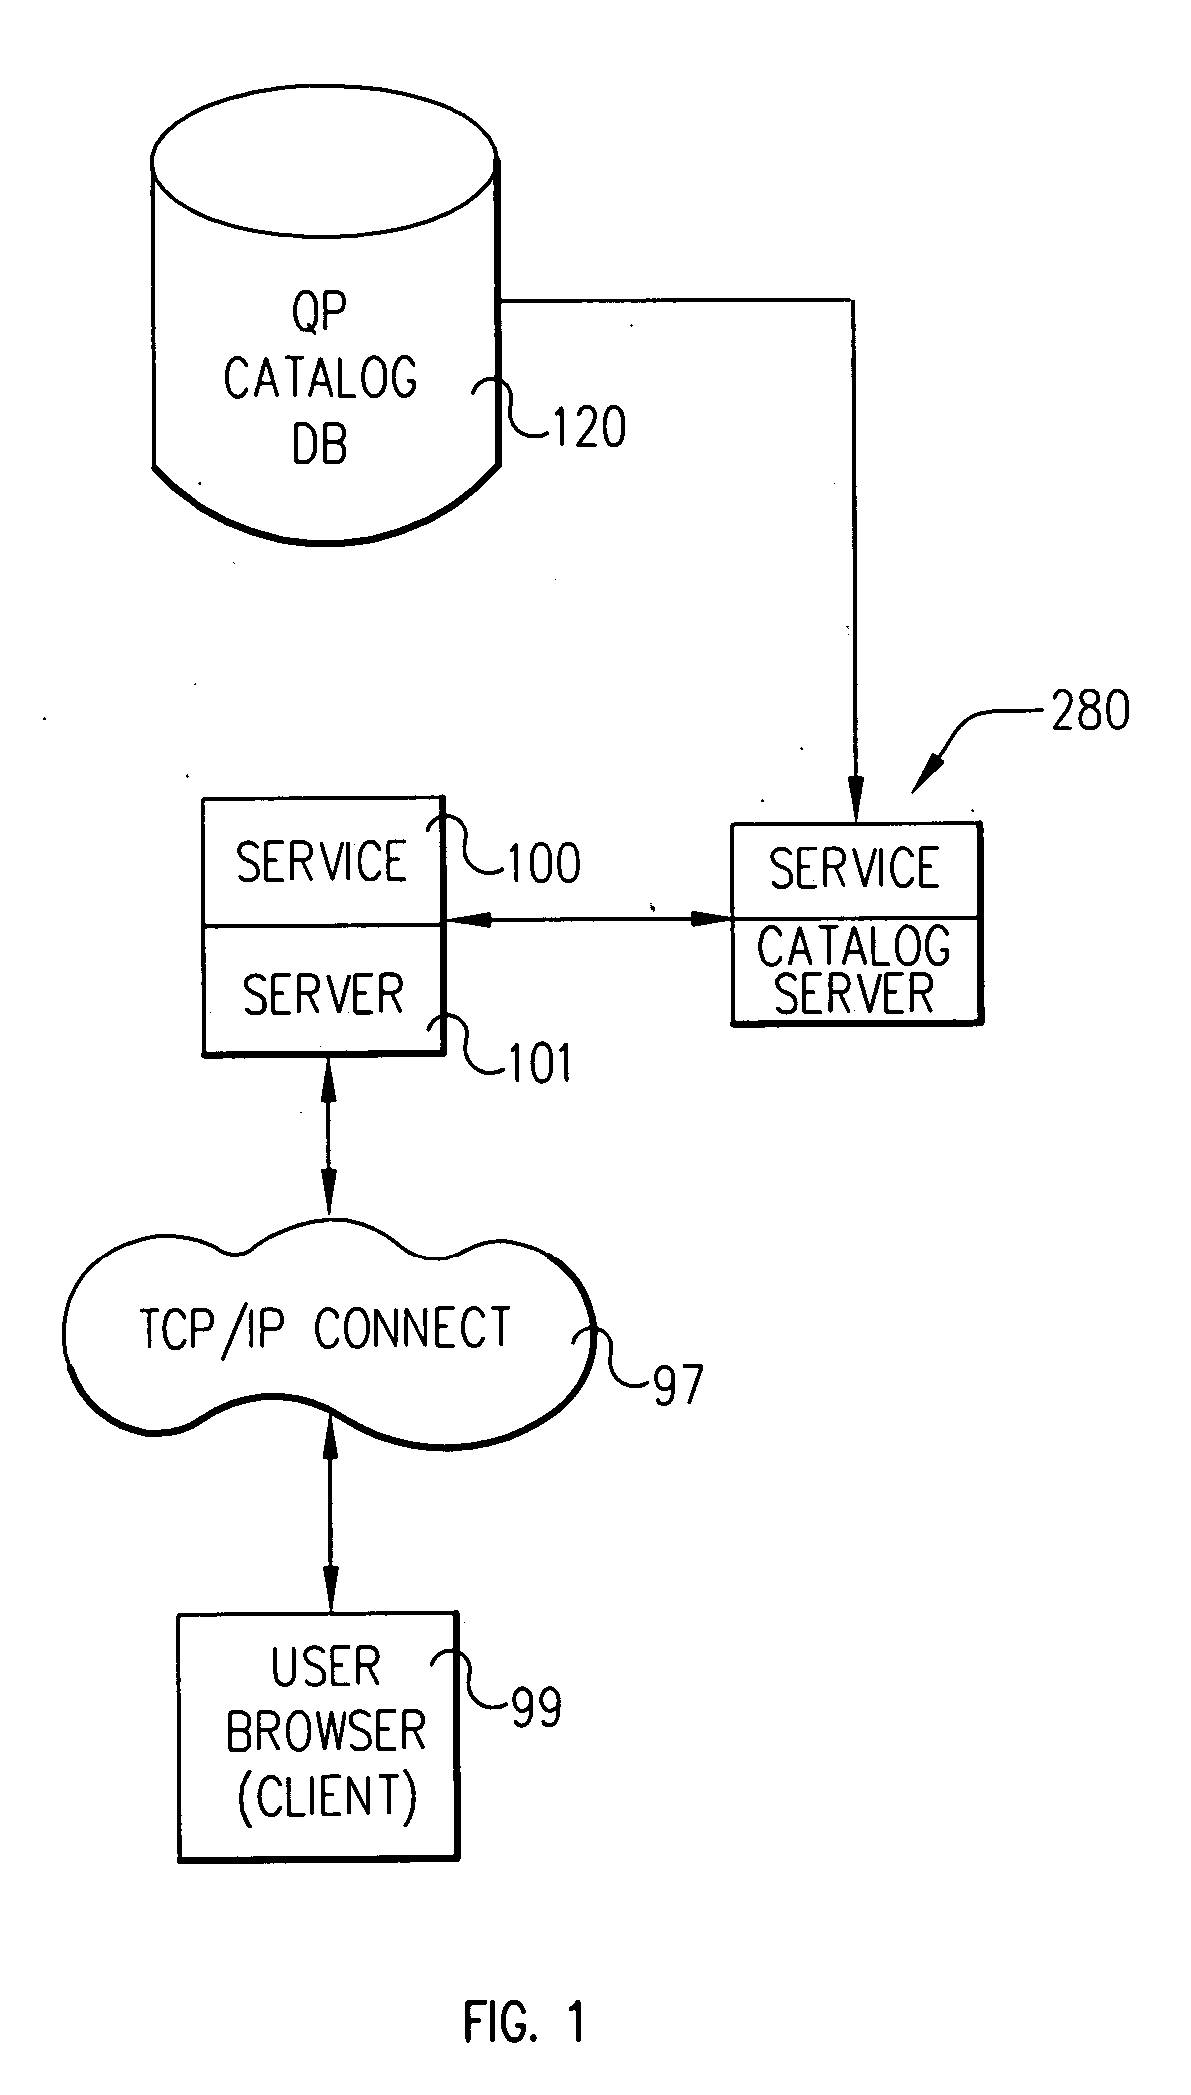 System and method for command line administration of project spaces using XML objects